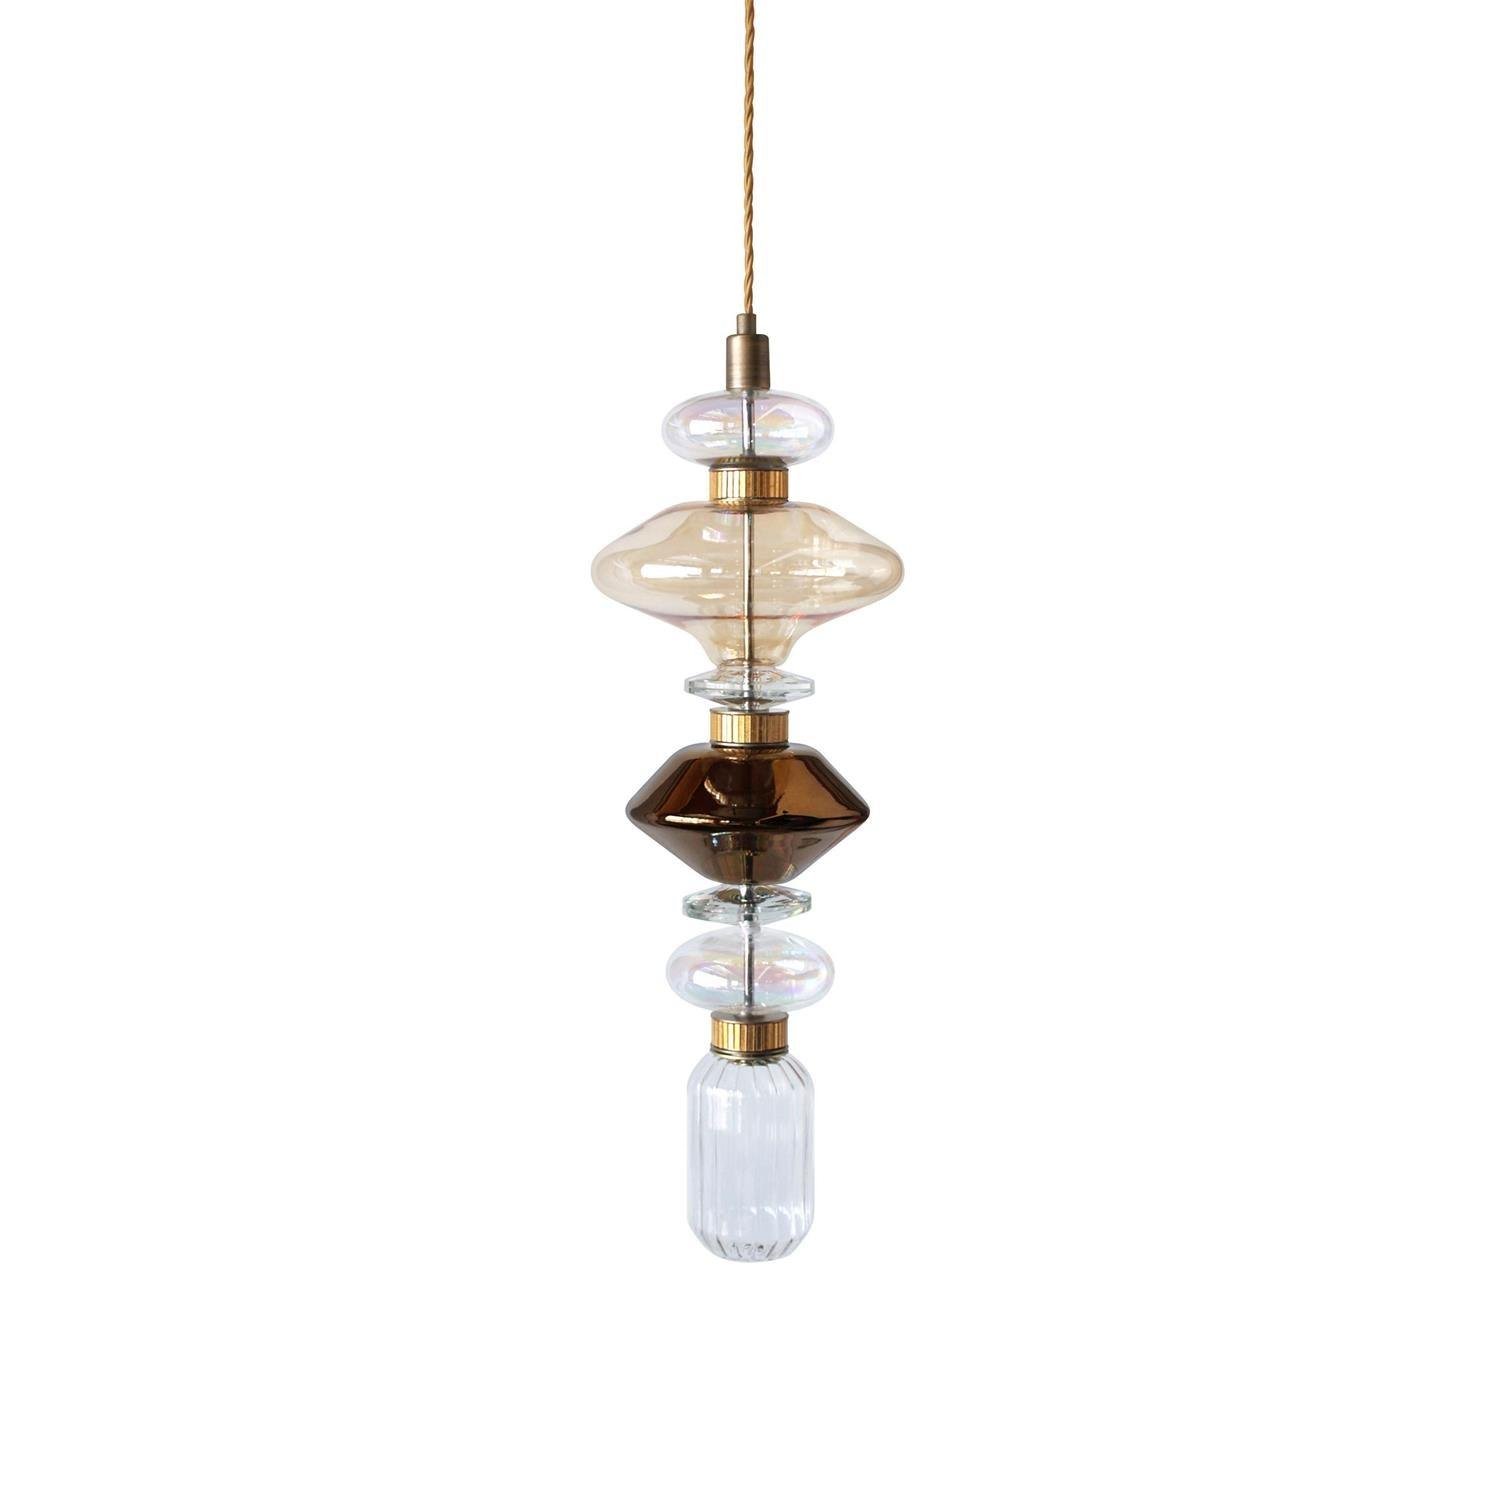 Ballet Pendant Lamp Model E with a diameter of 7.9 inches and a height of 24 inches, or 20cm x 61cm, offering a clear design and cool light ambiance.